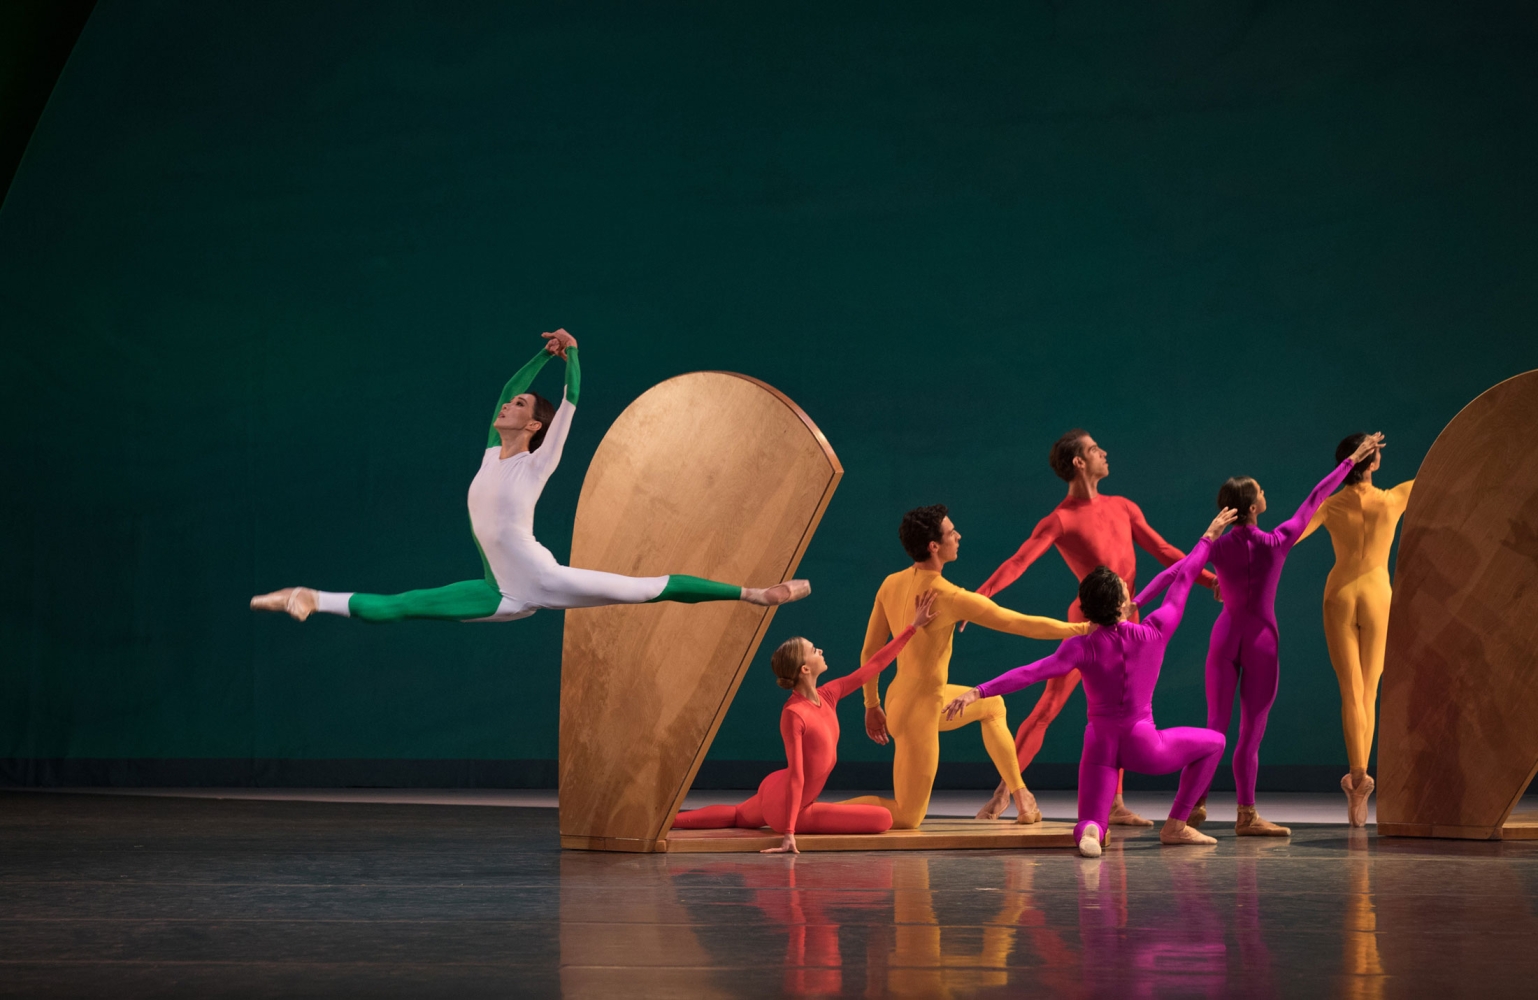 Sarah Crowner
Scene from&amp;nbsp;Garden Blue, 2018
American Ballet Theater, New York
Sets and costumes by Sarah Crowner, choreographed by Jessica Lang
Photo by Rosalie O&amp;#39;Connor; Courtesy of American Ballet Theatre.